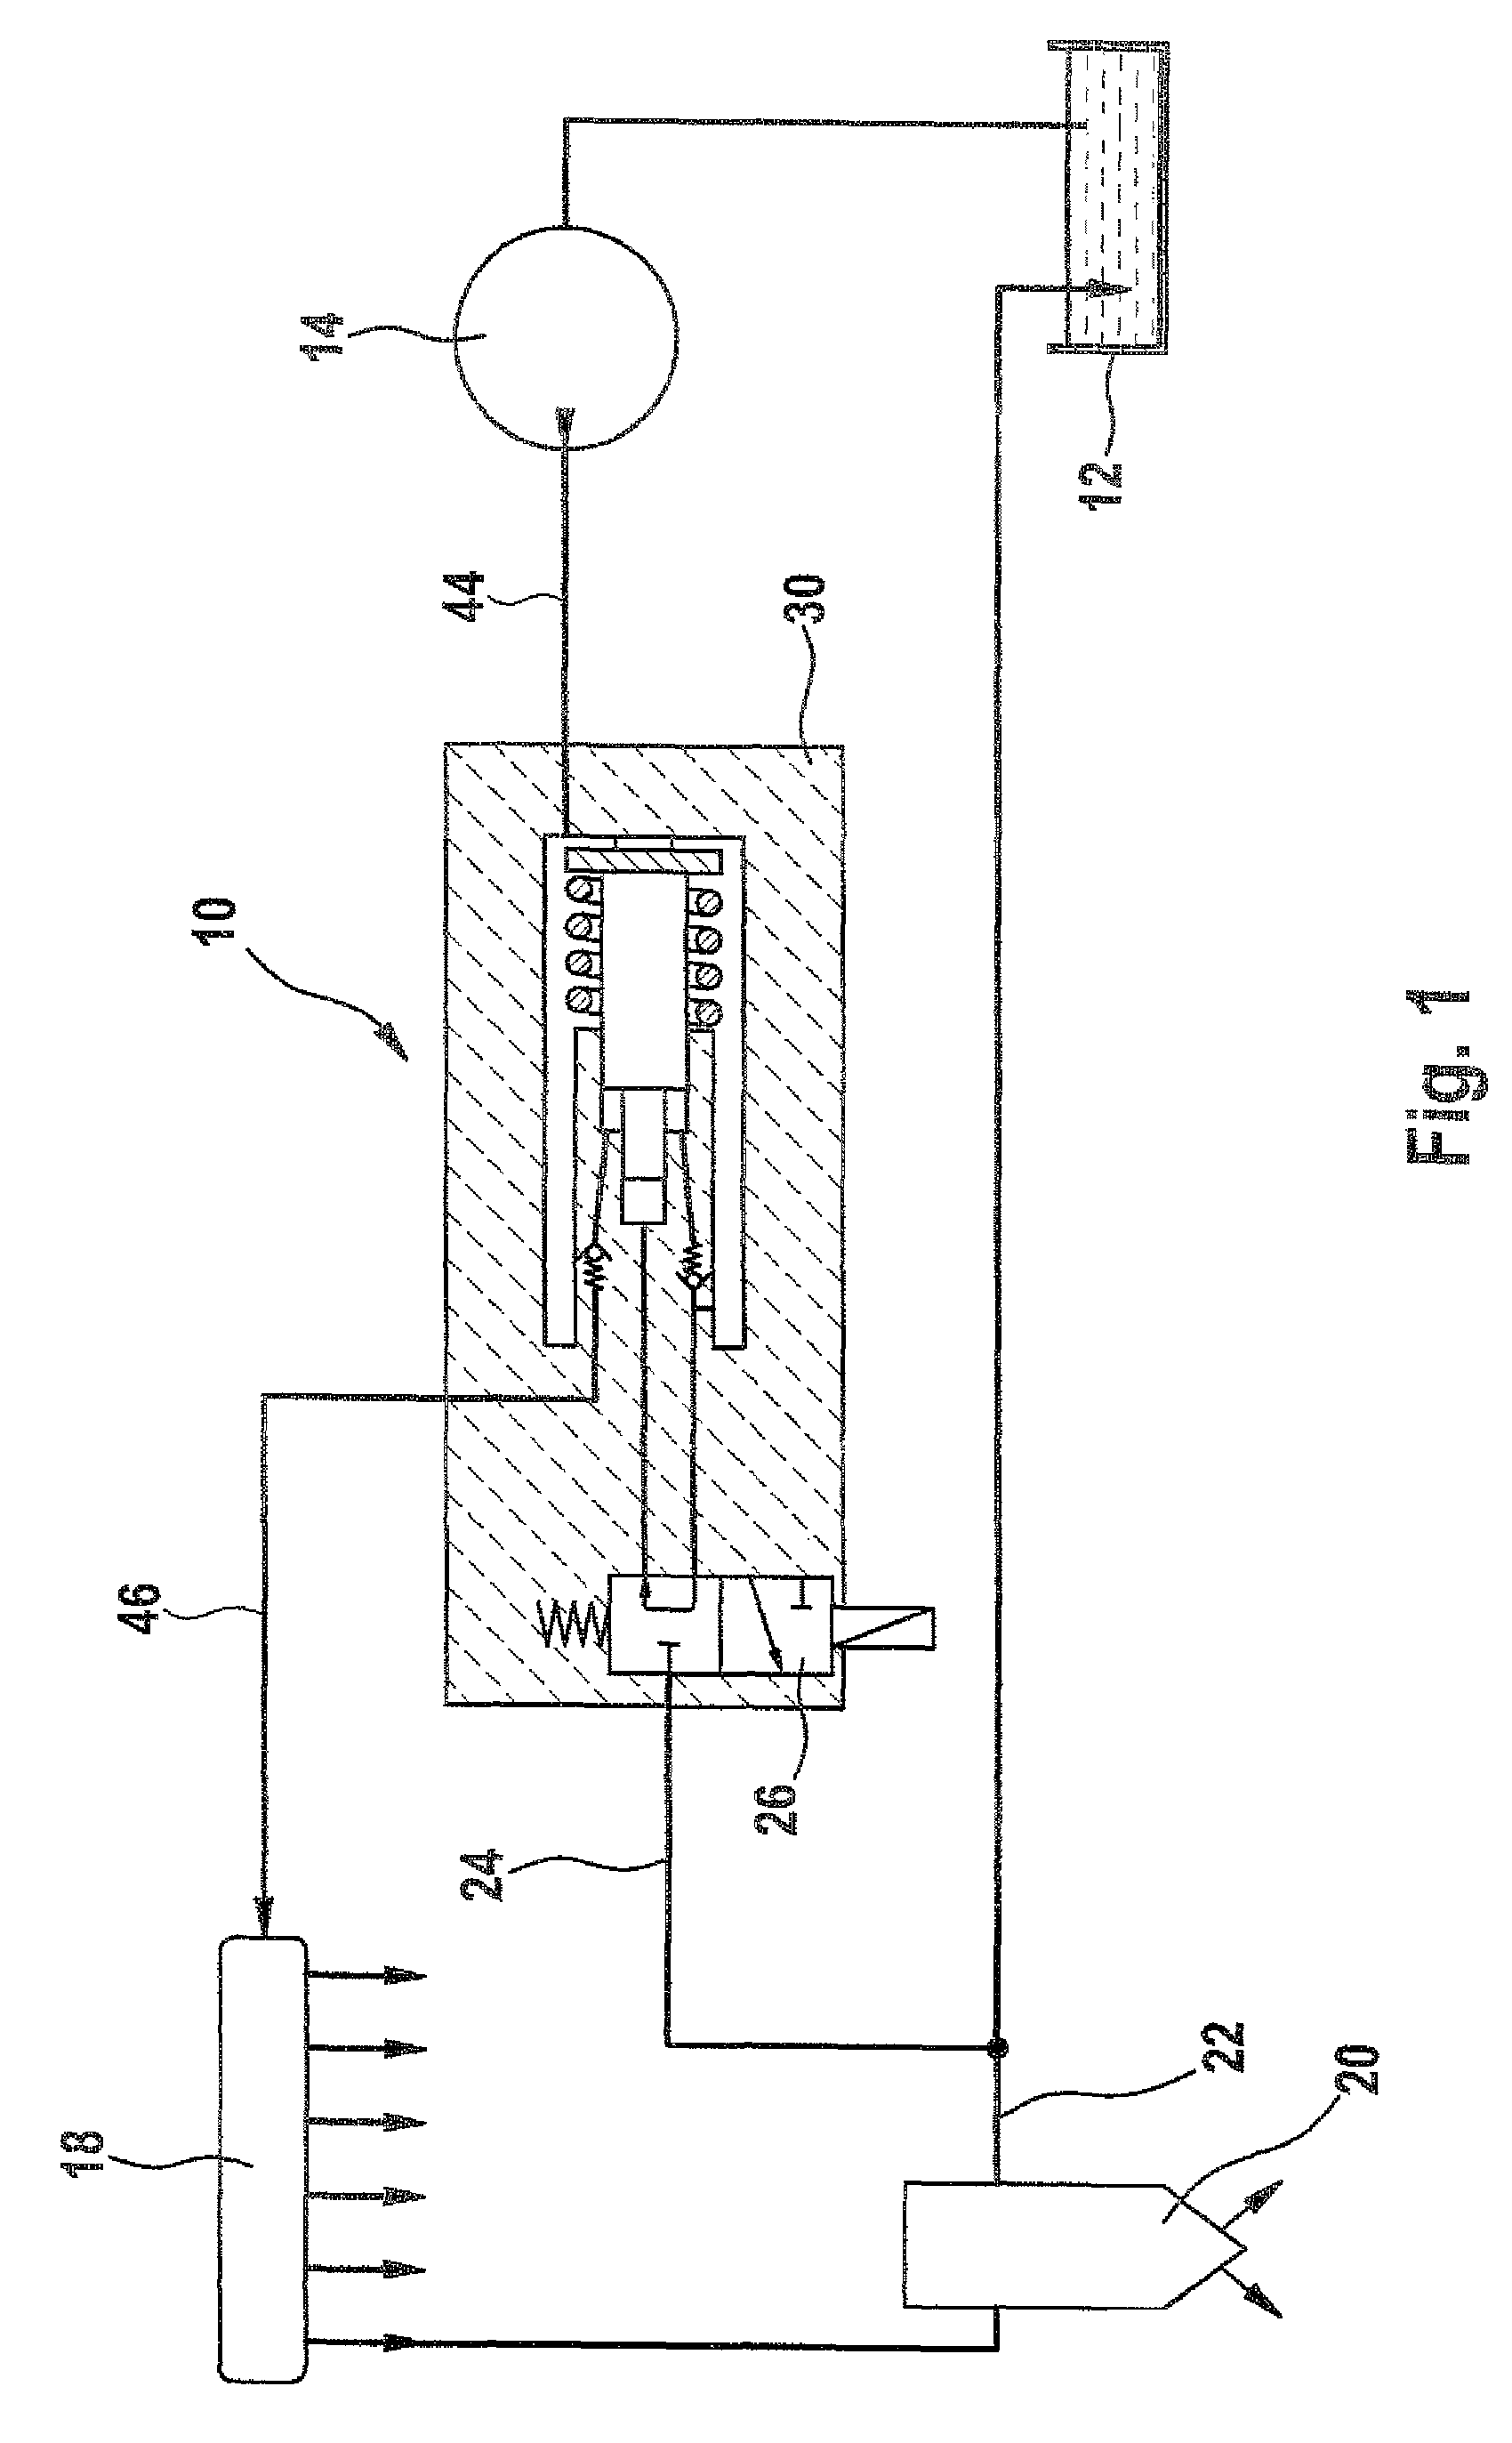 Fuel injection system with pressure boosting